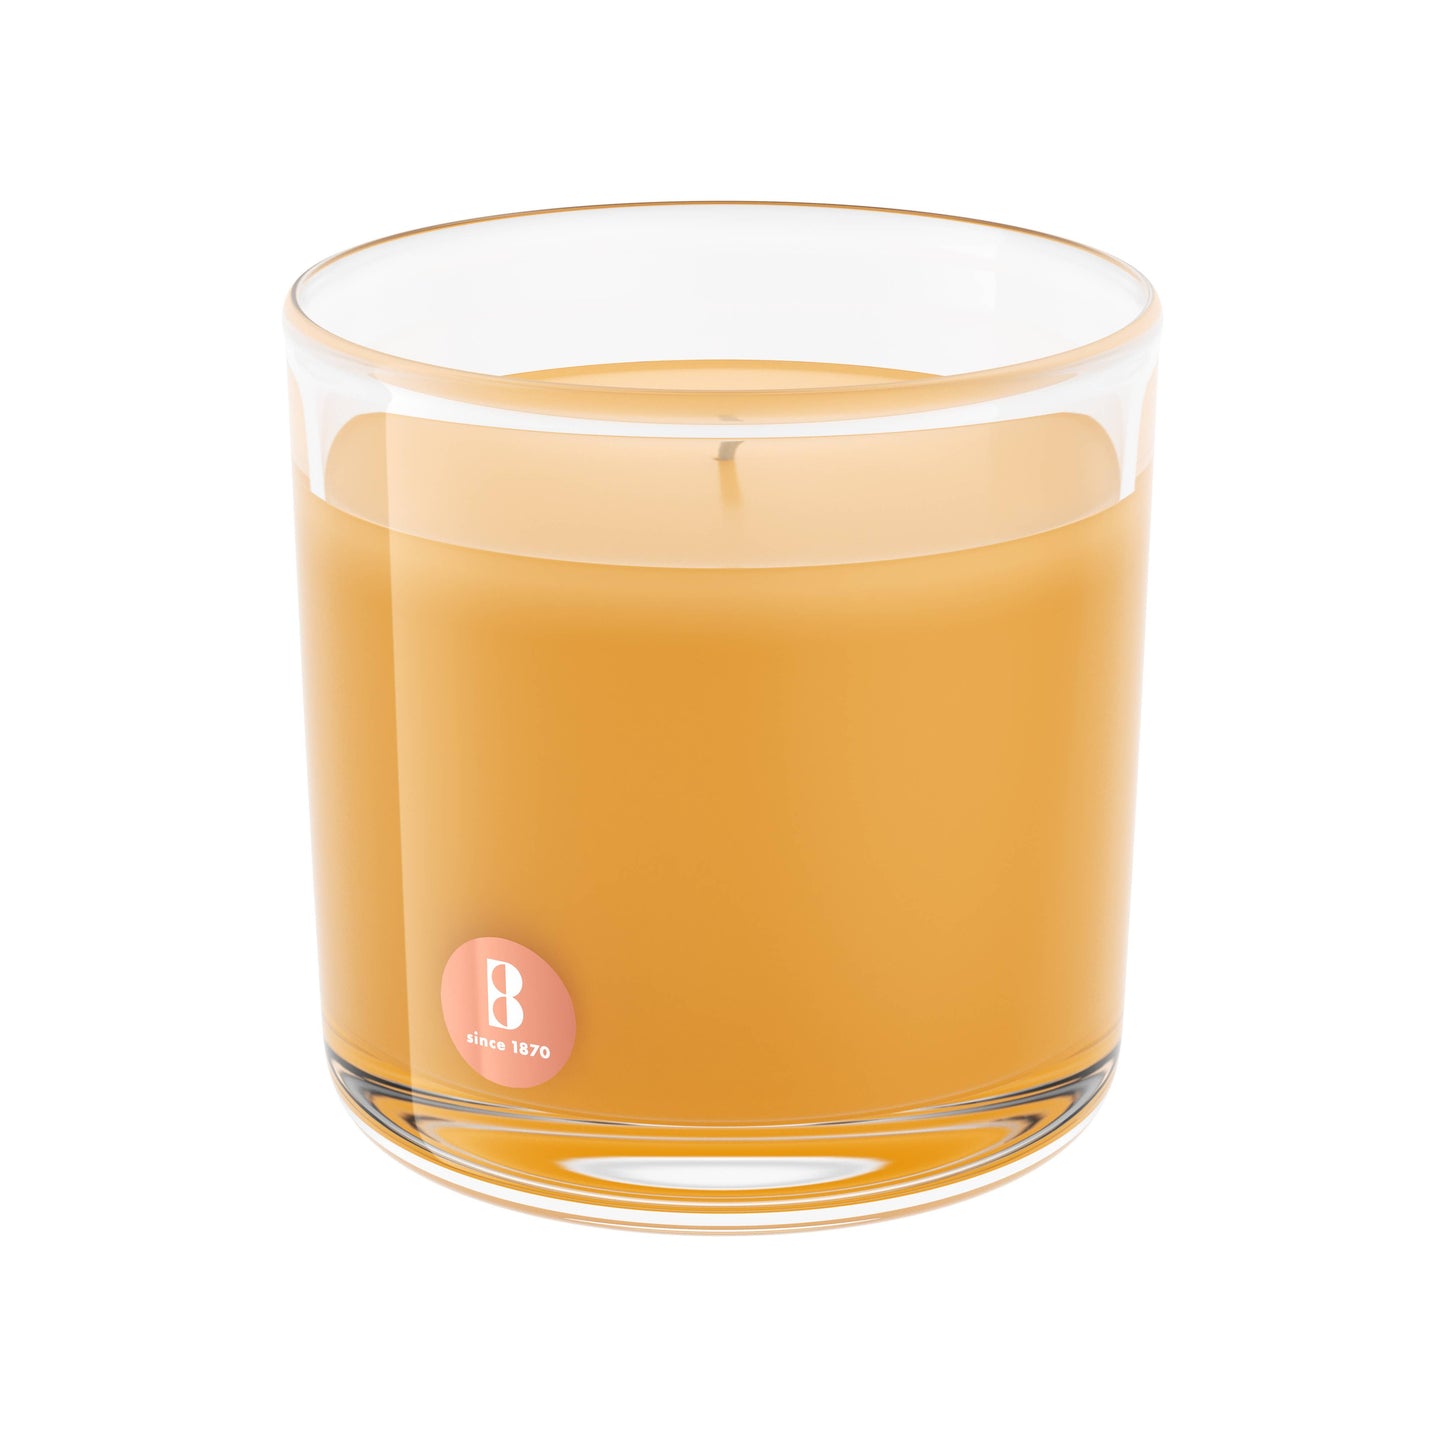 Mango Scented Candle - 3.75 x 3.75 Inches - 43 Hours